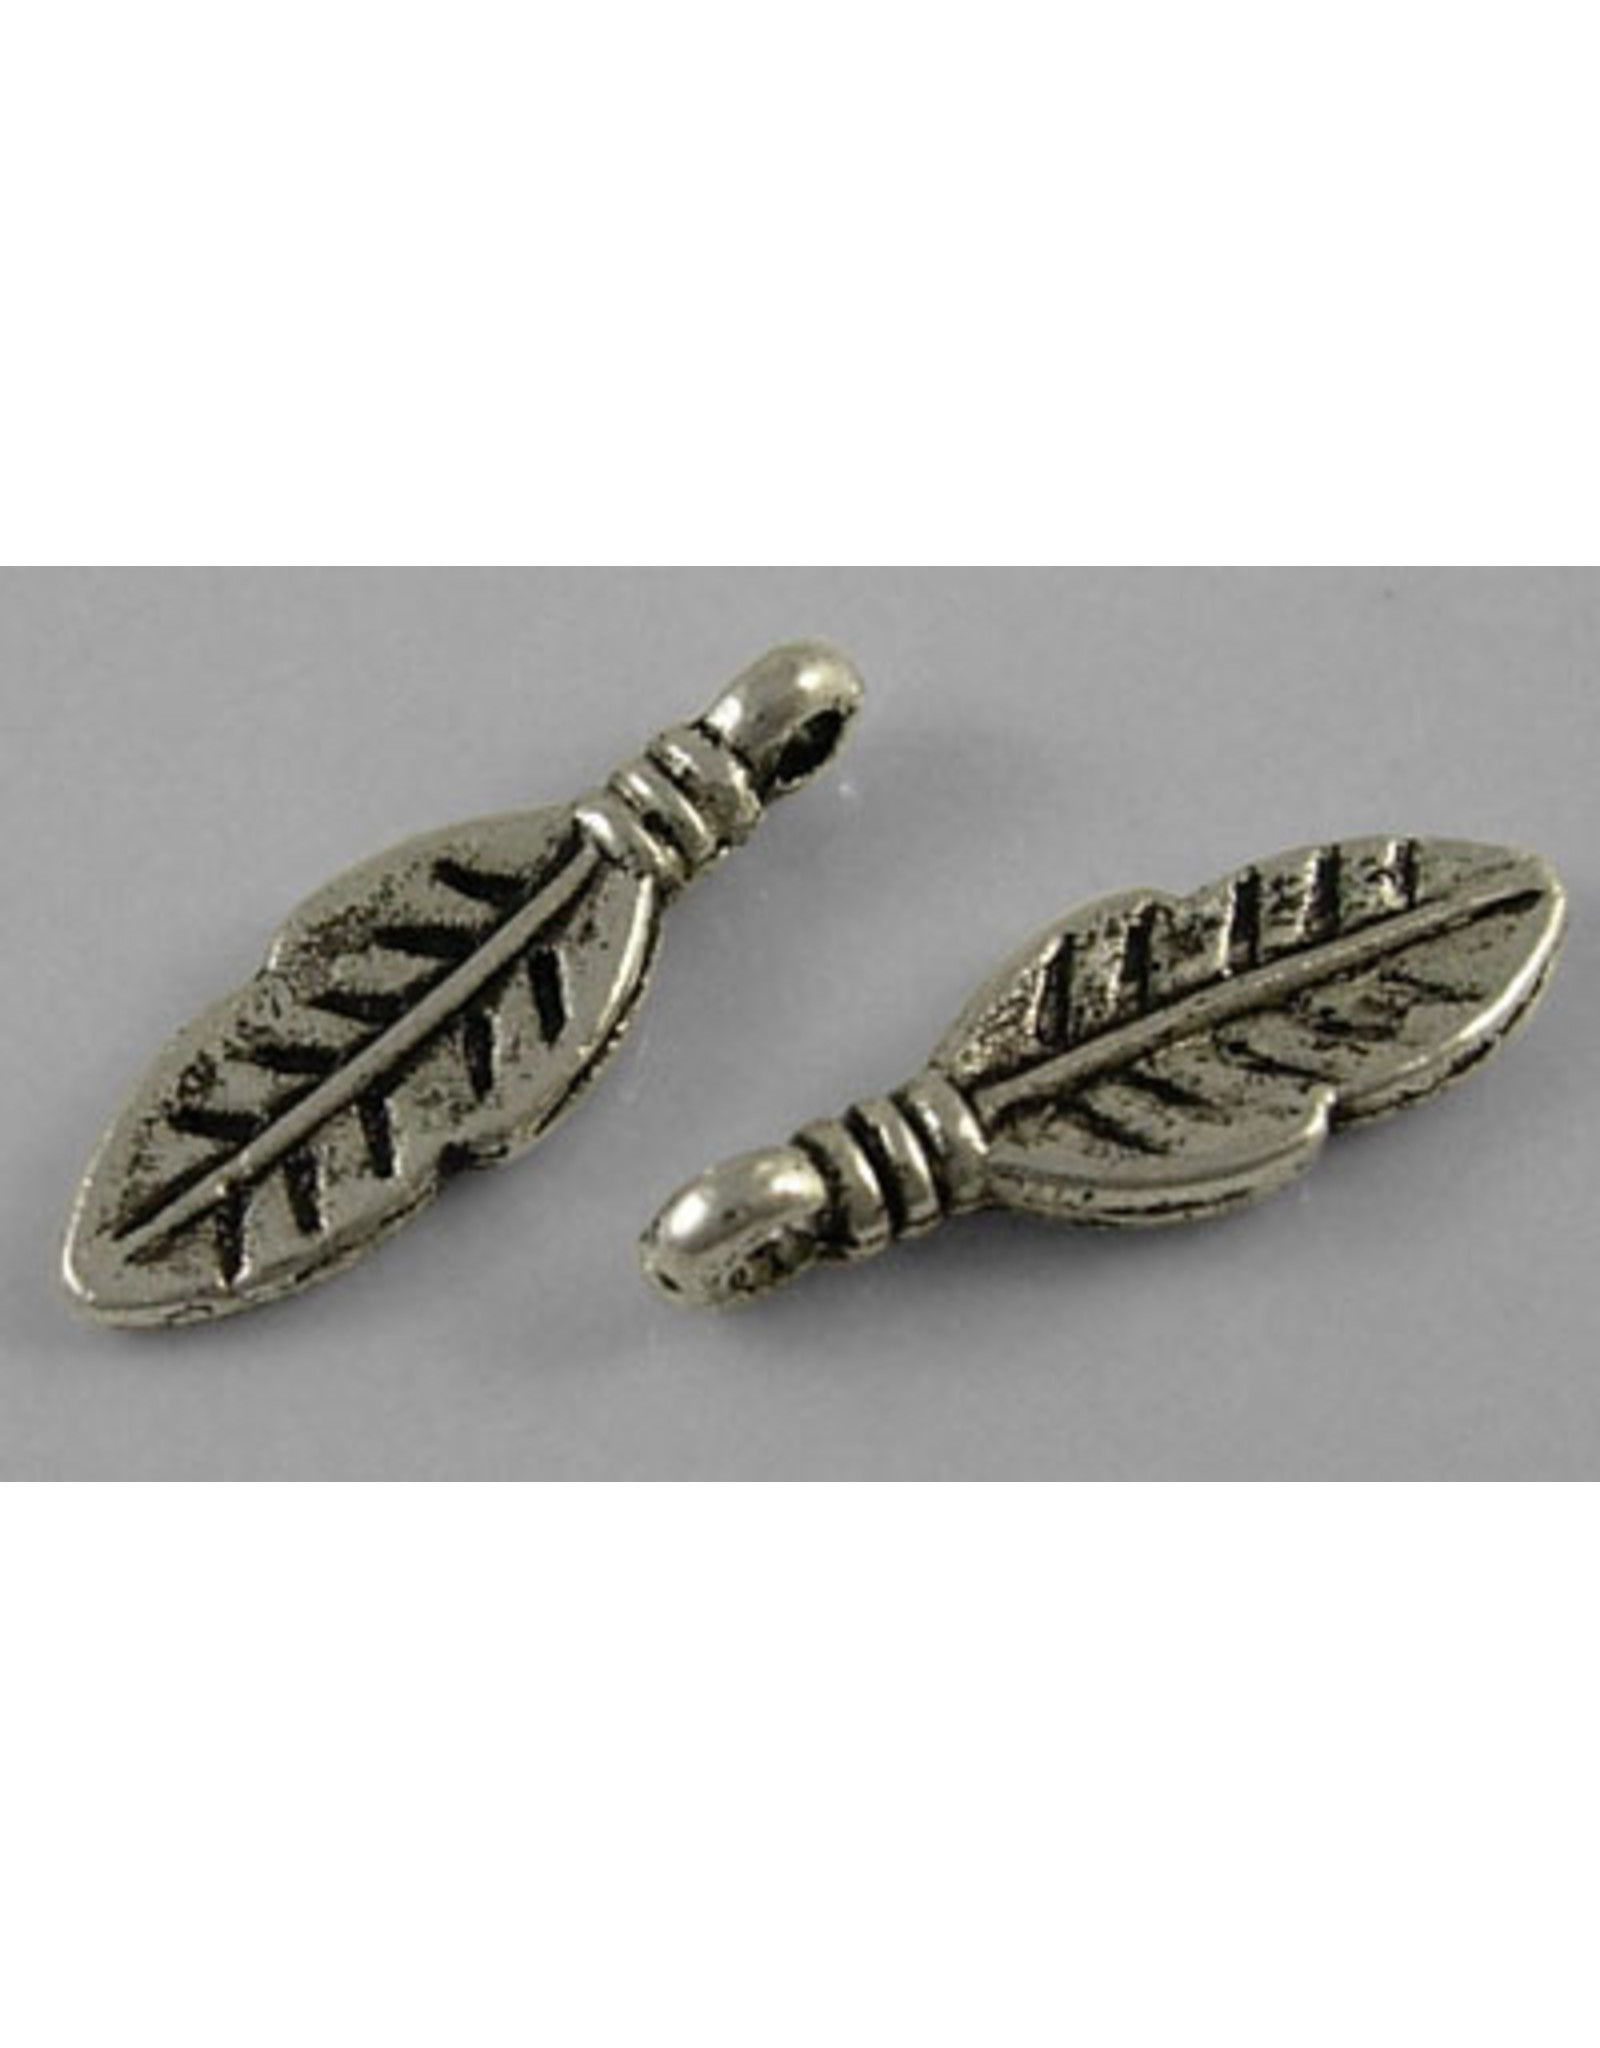 Feather Antique Silver 17x6mm   x100 NF